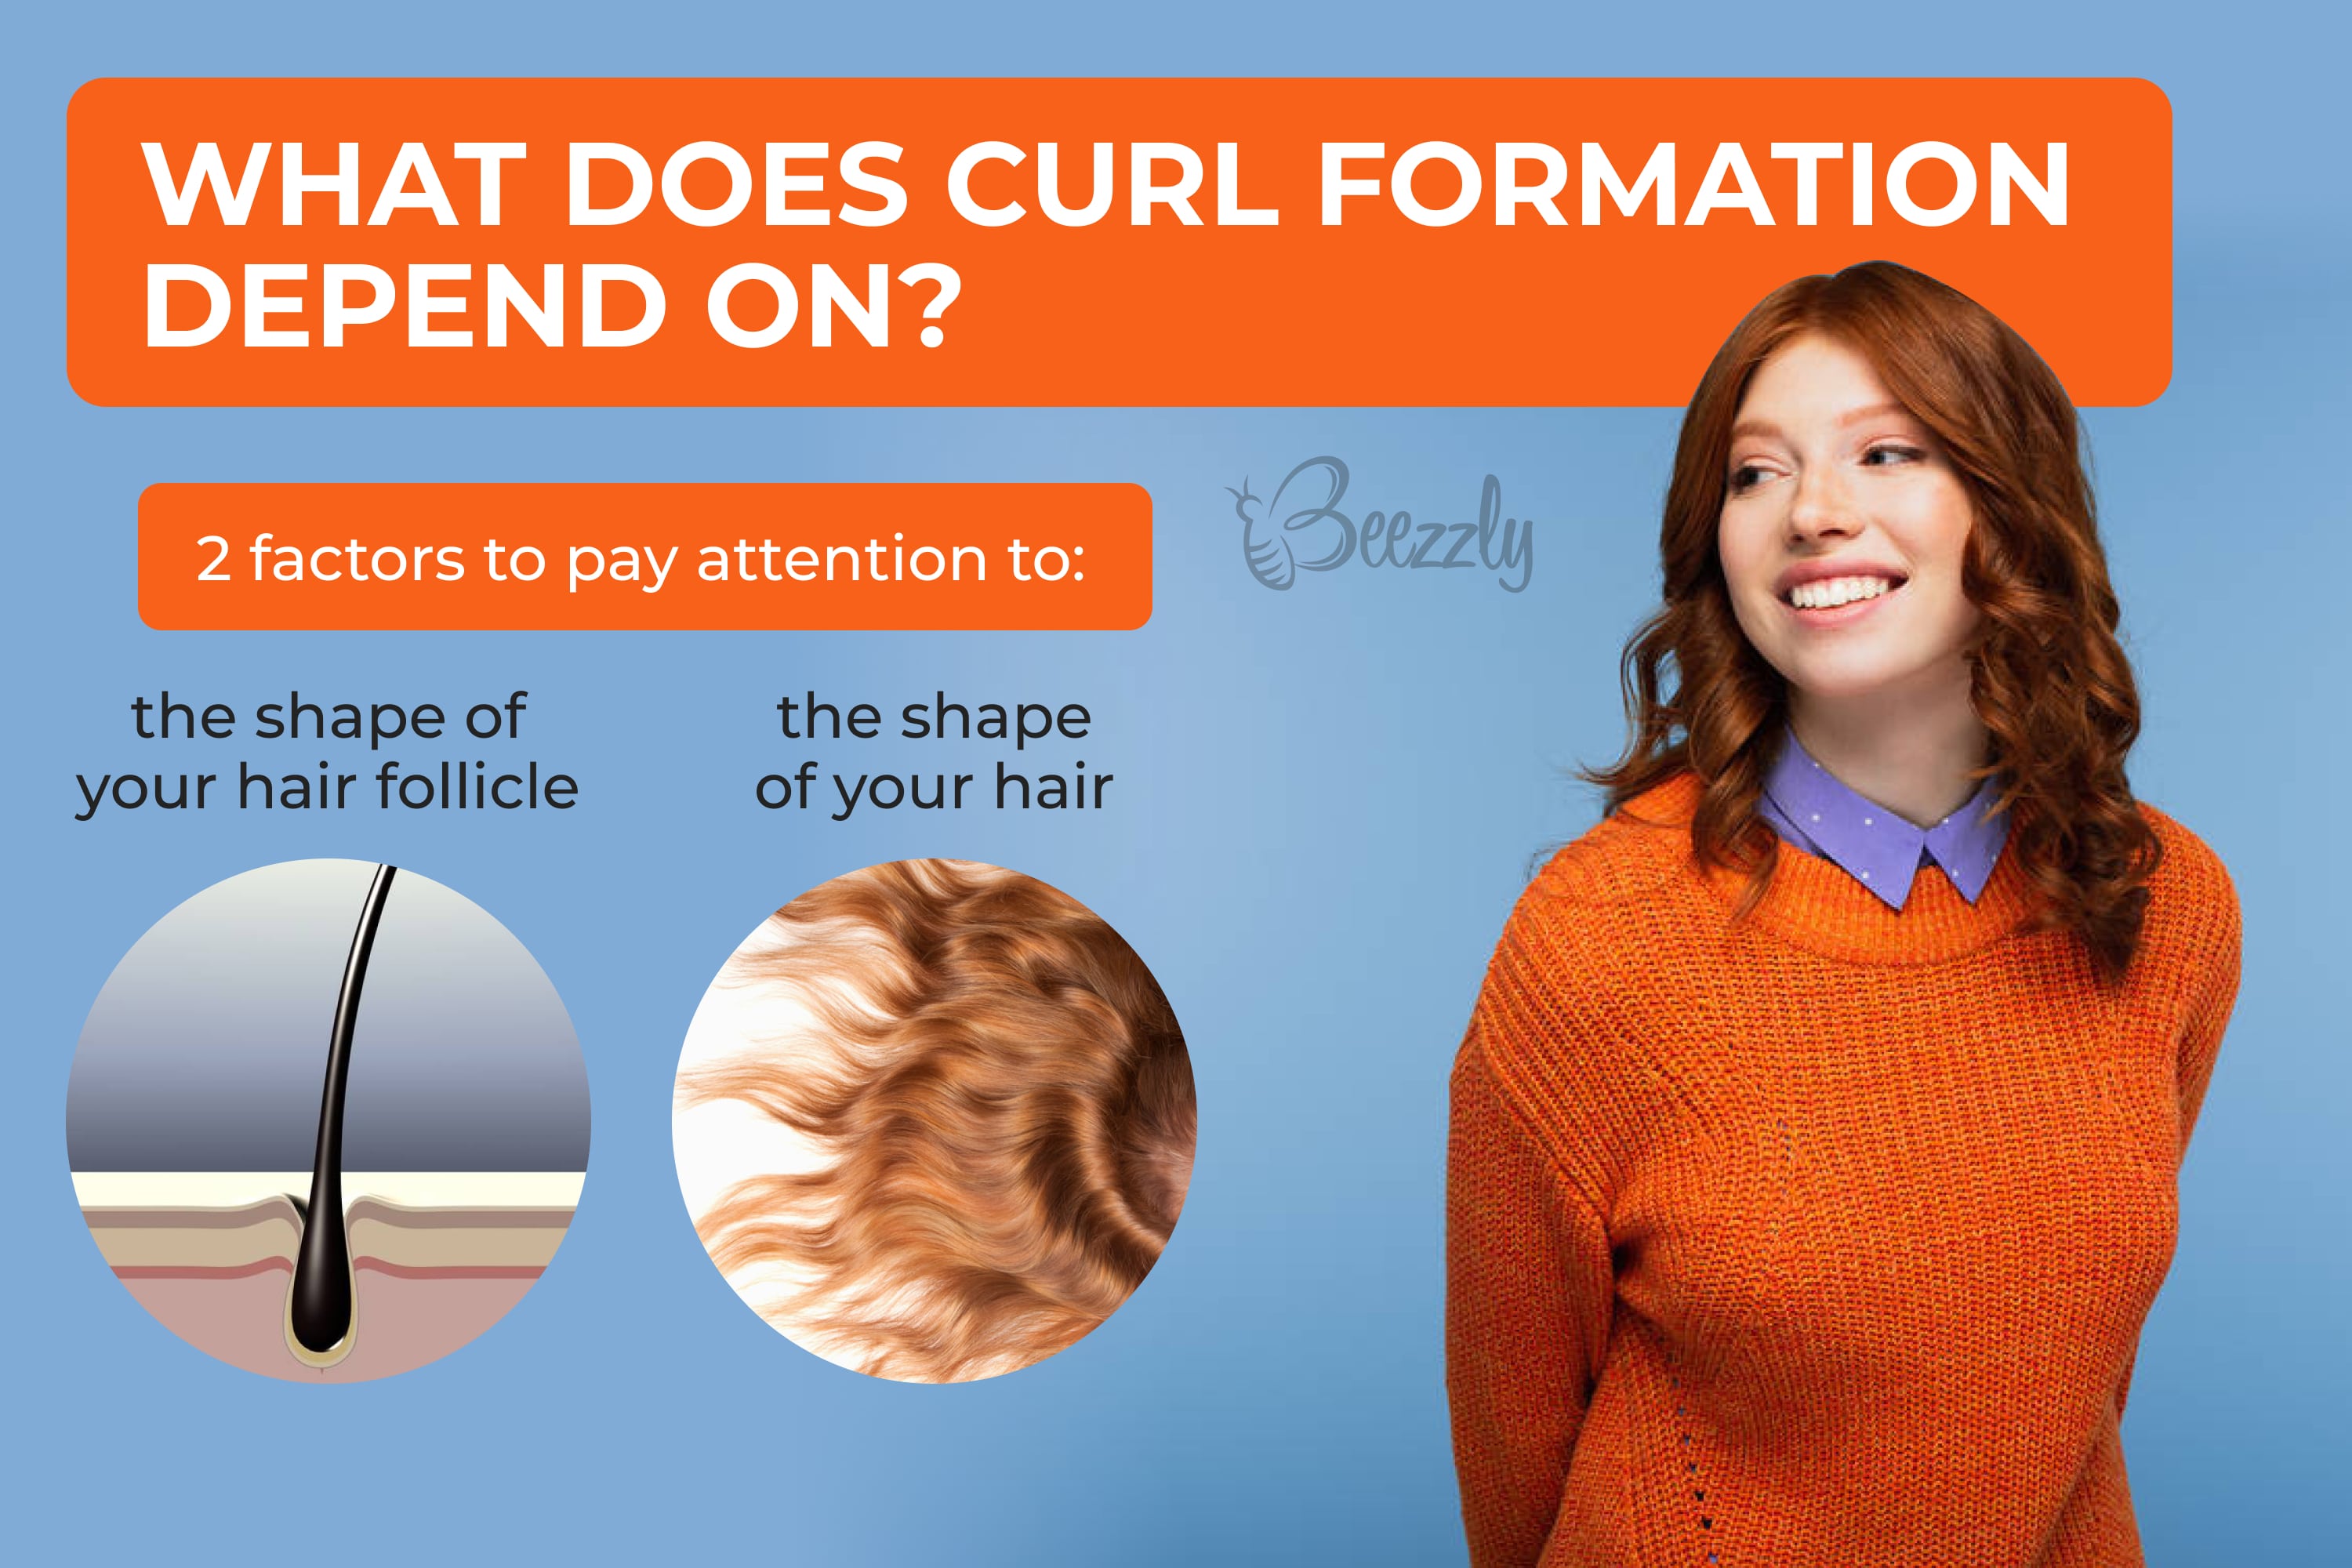 What does curl formation depend on